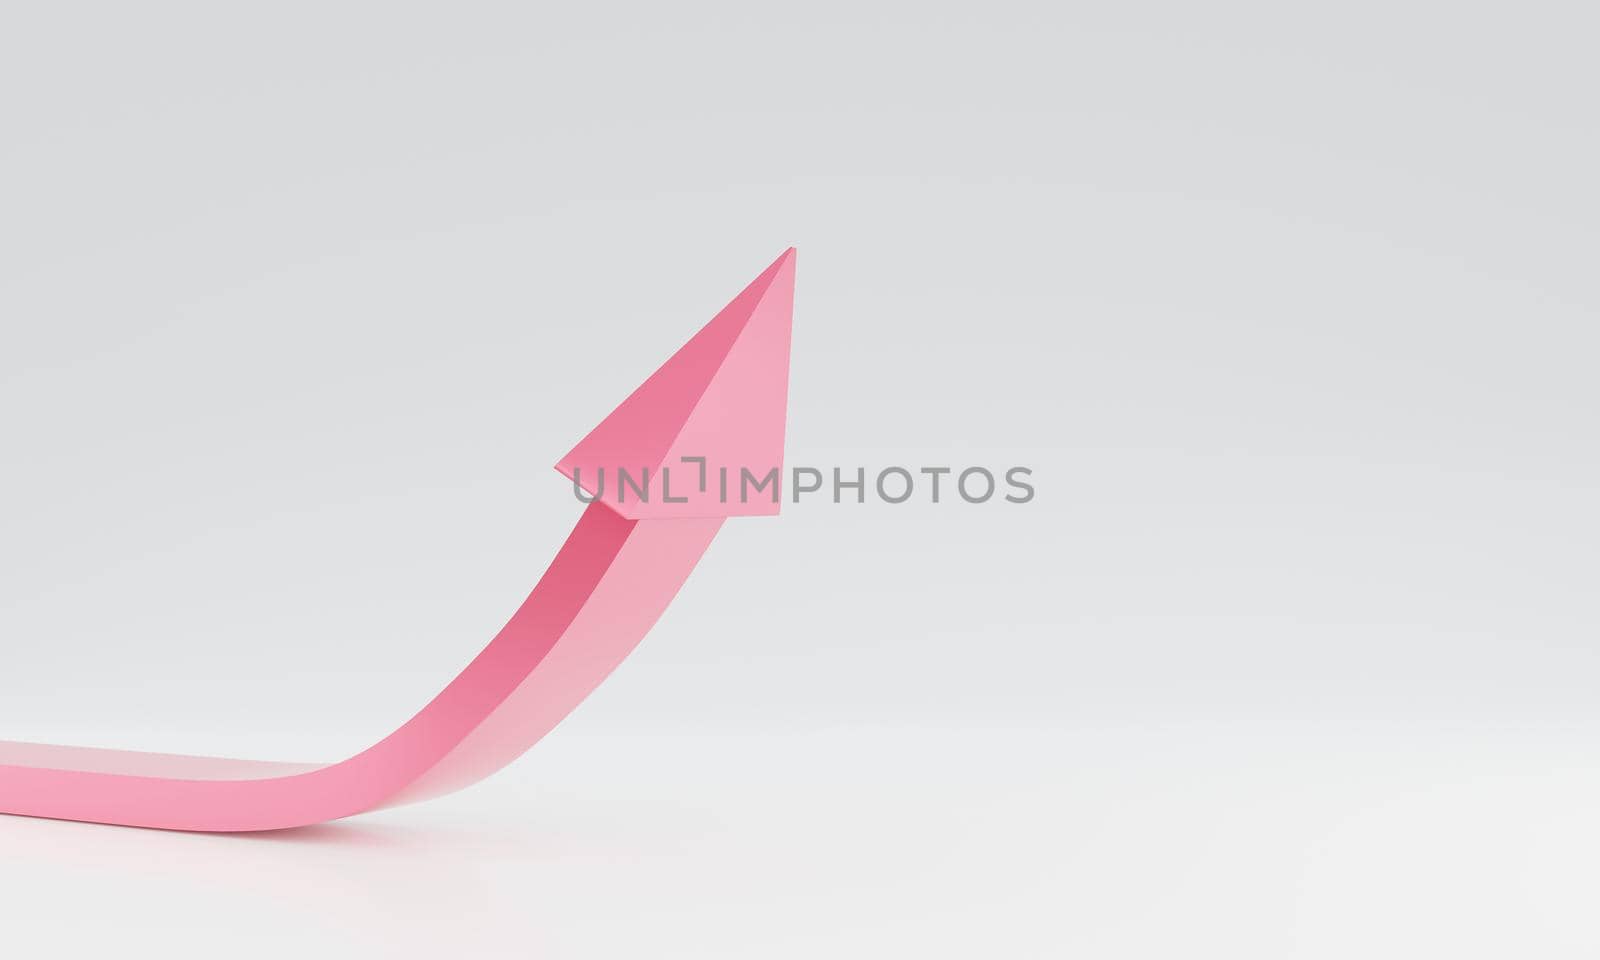 3D arrow upwards pink color arrow graph on a white background object 3d rendering by yodsawai